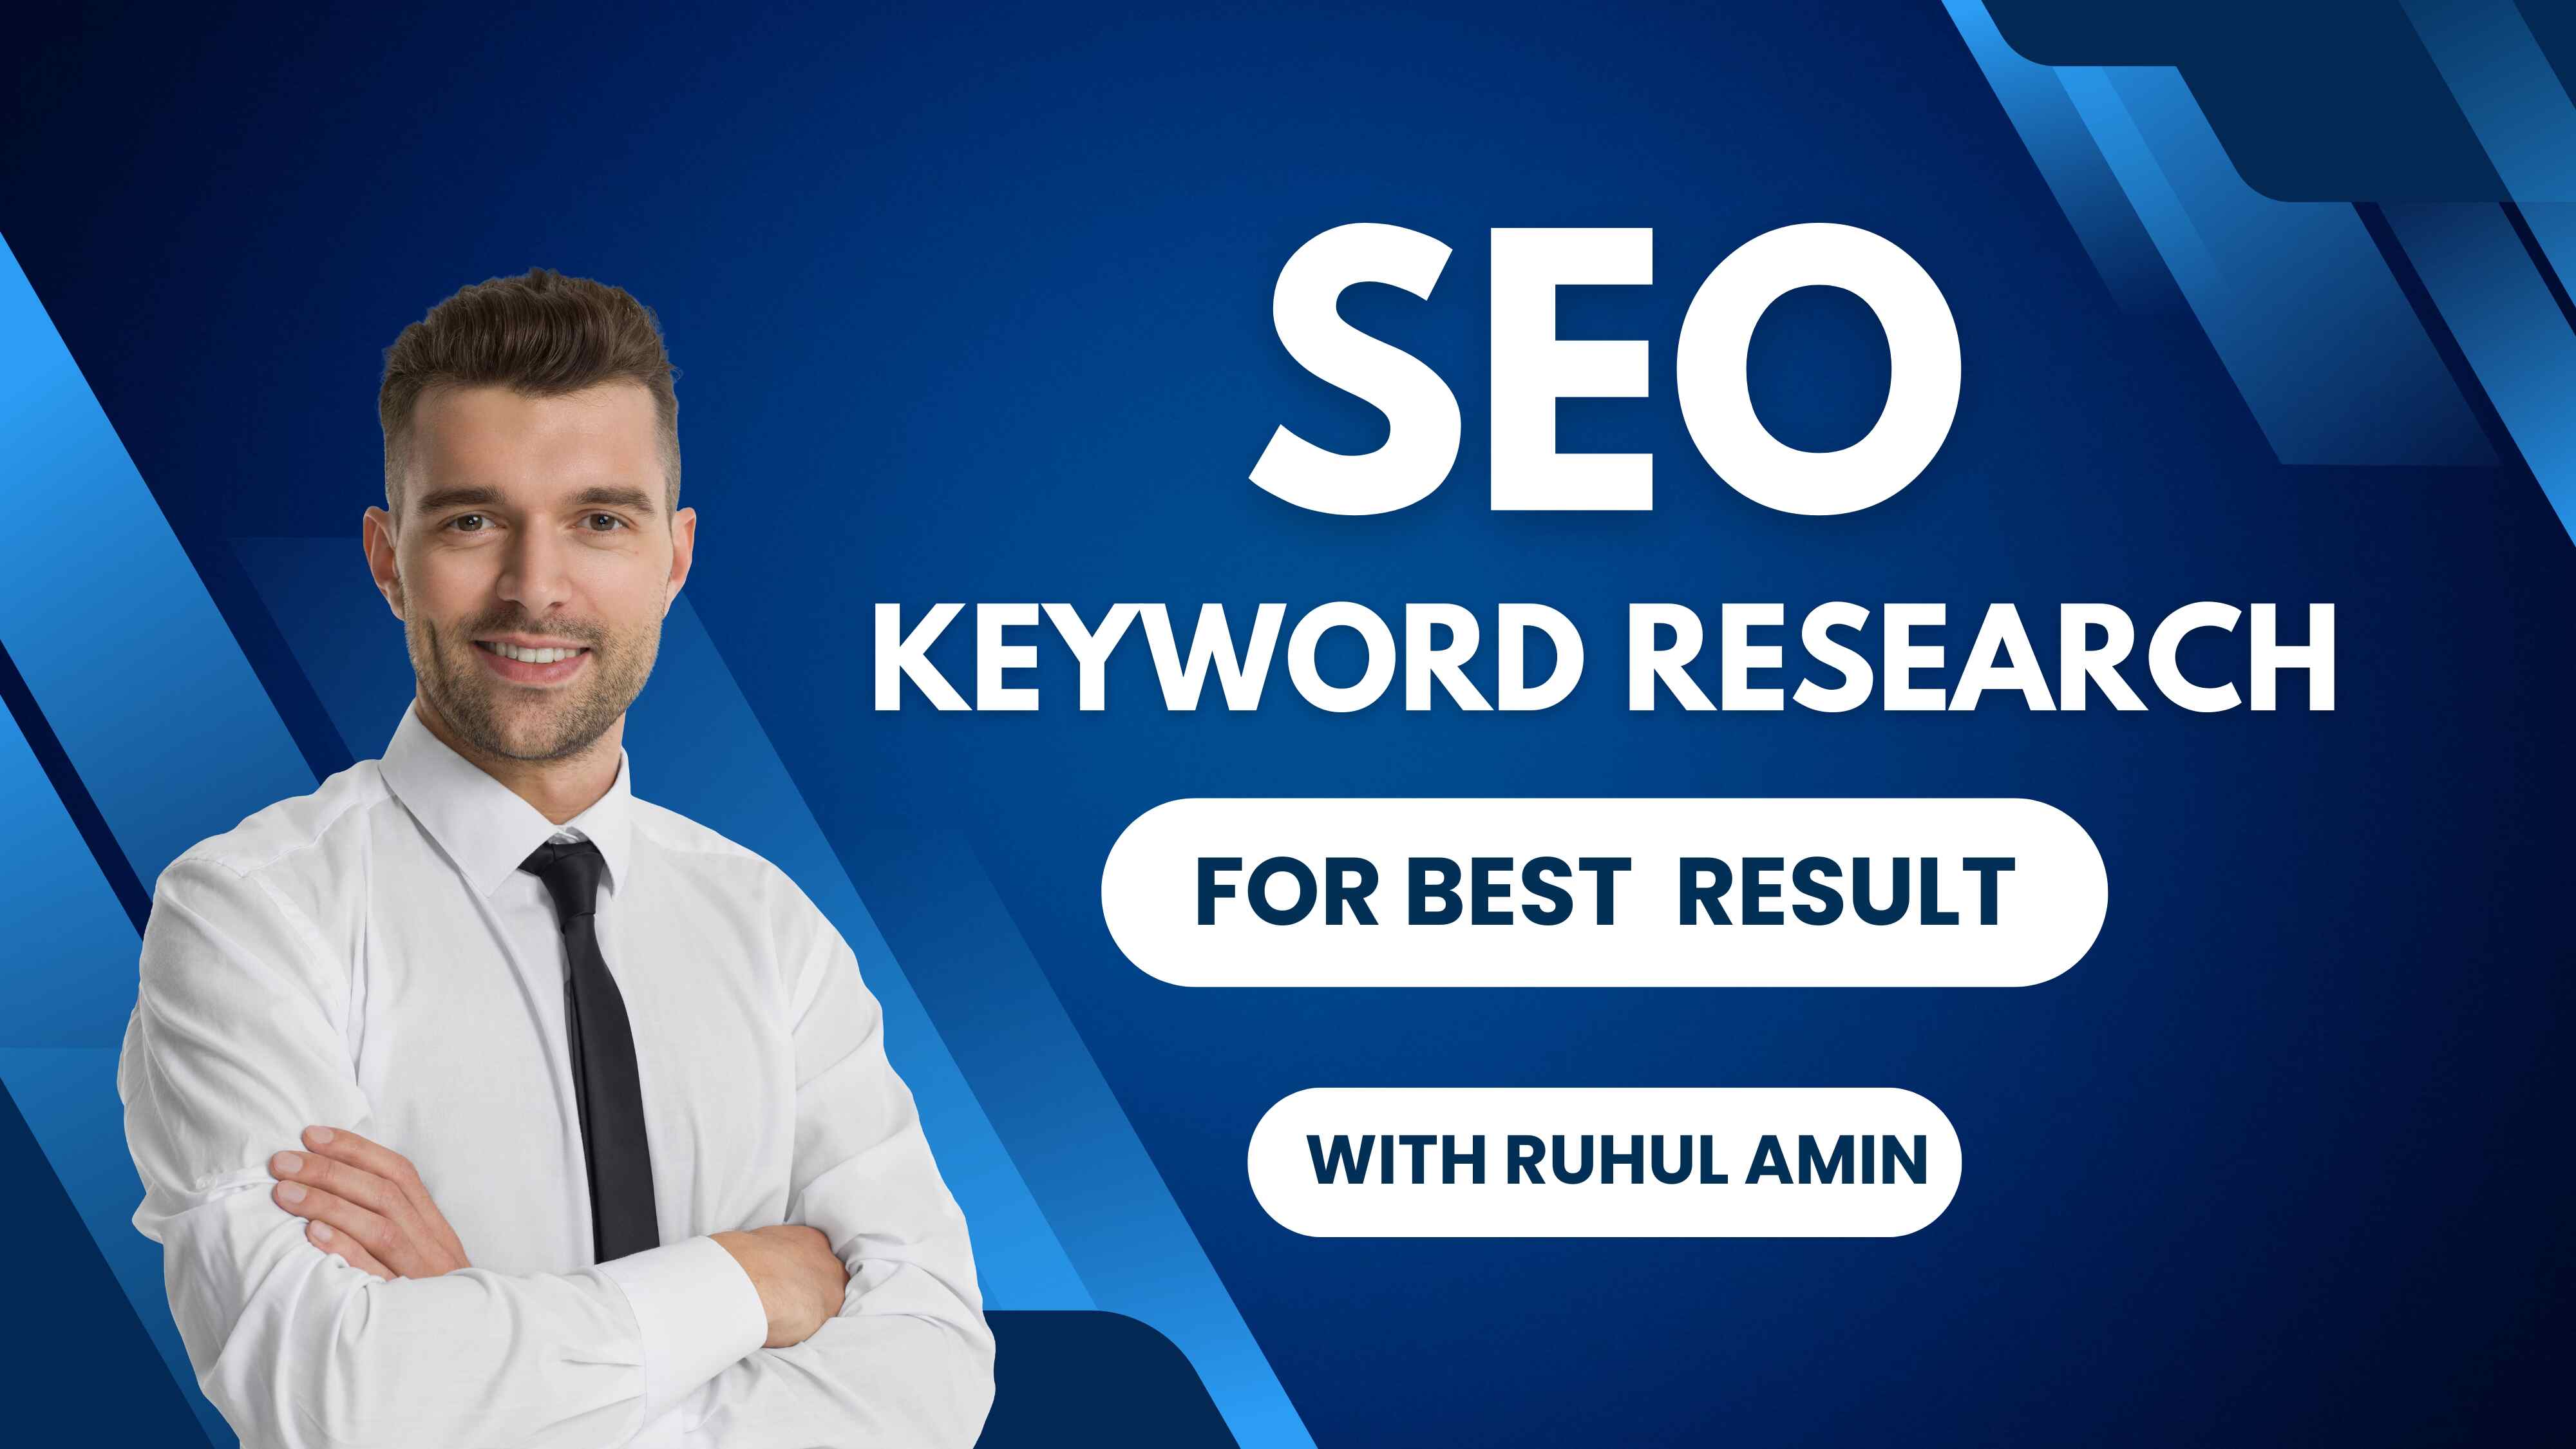 I will do the excellent SEO keywords research